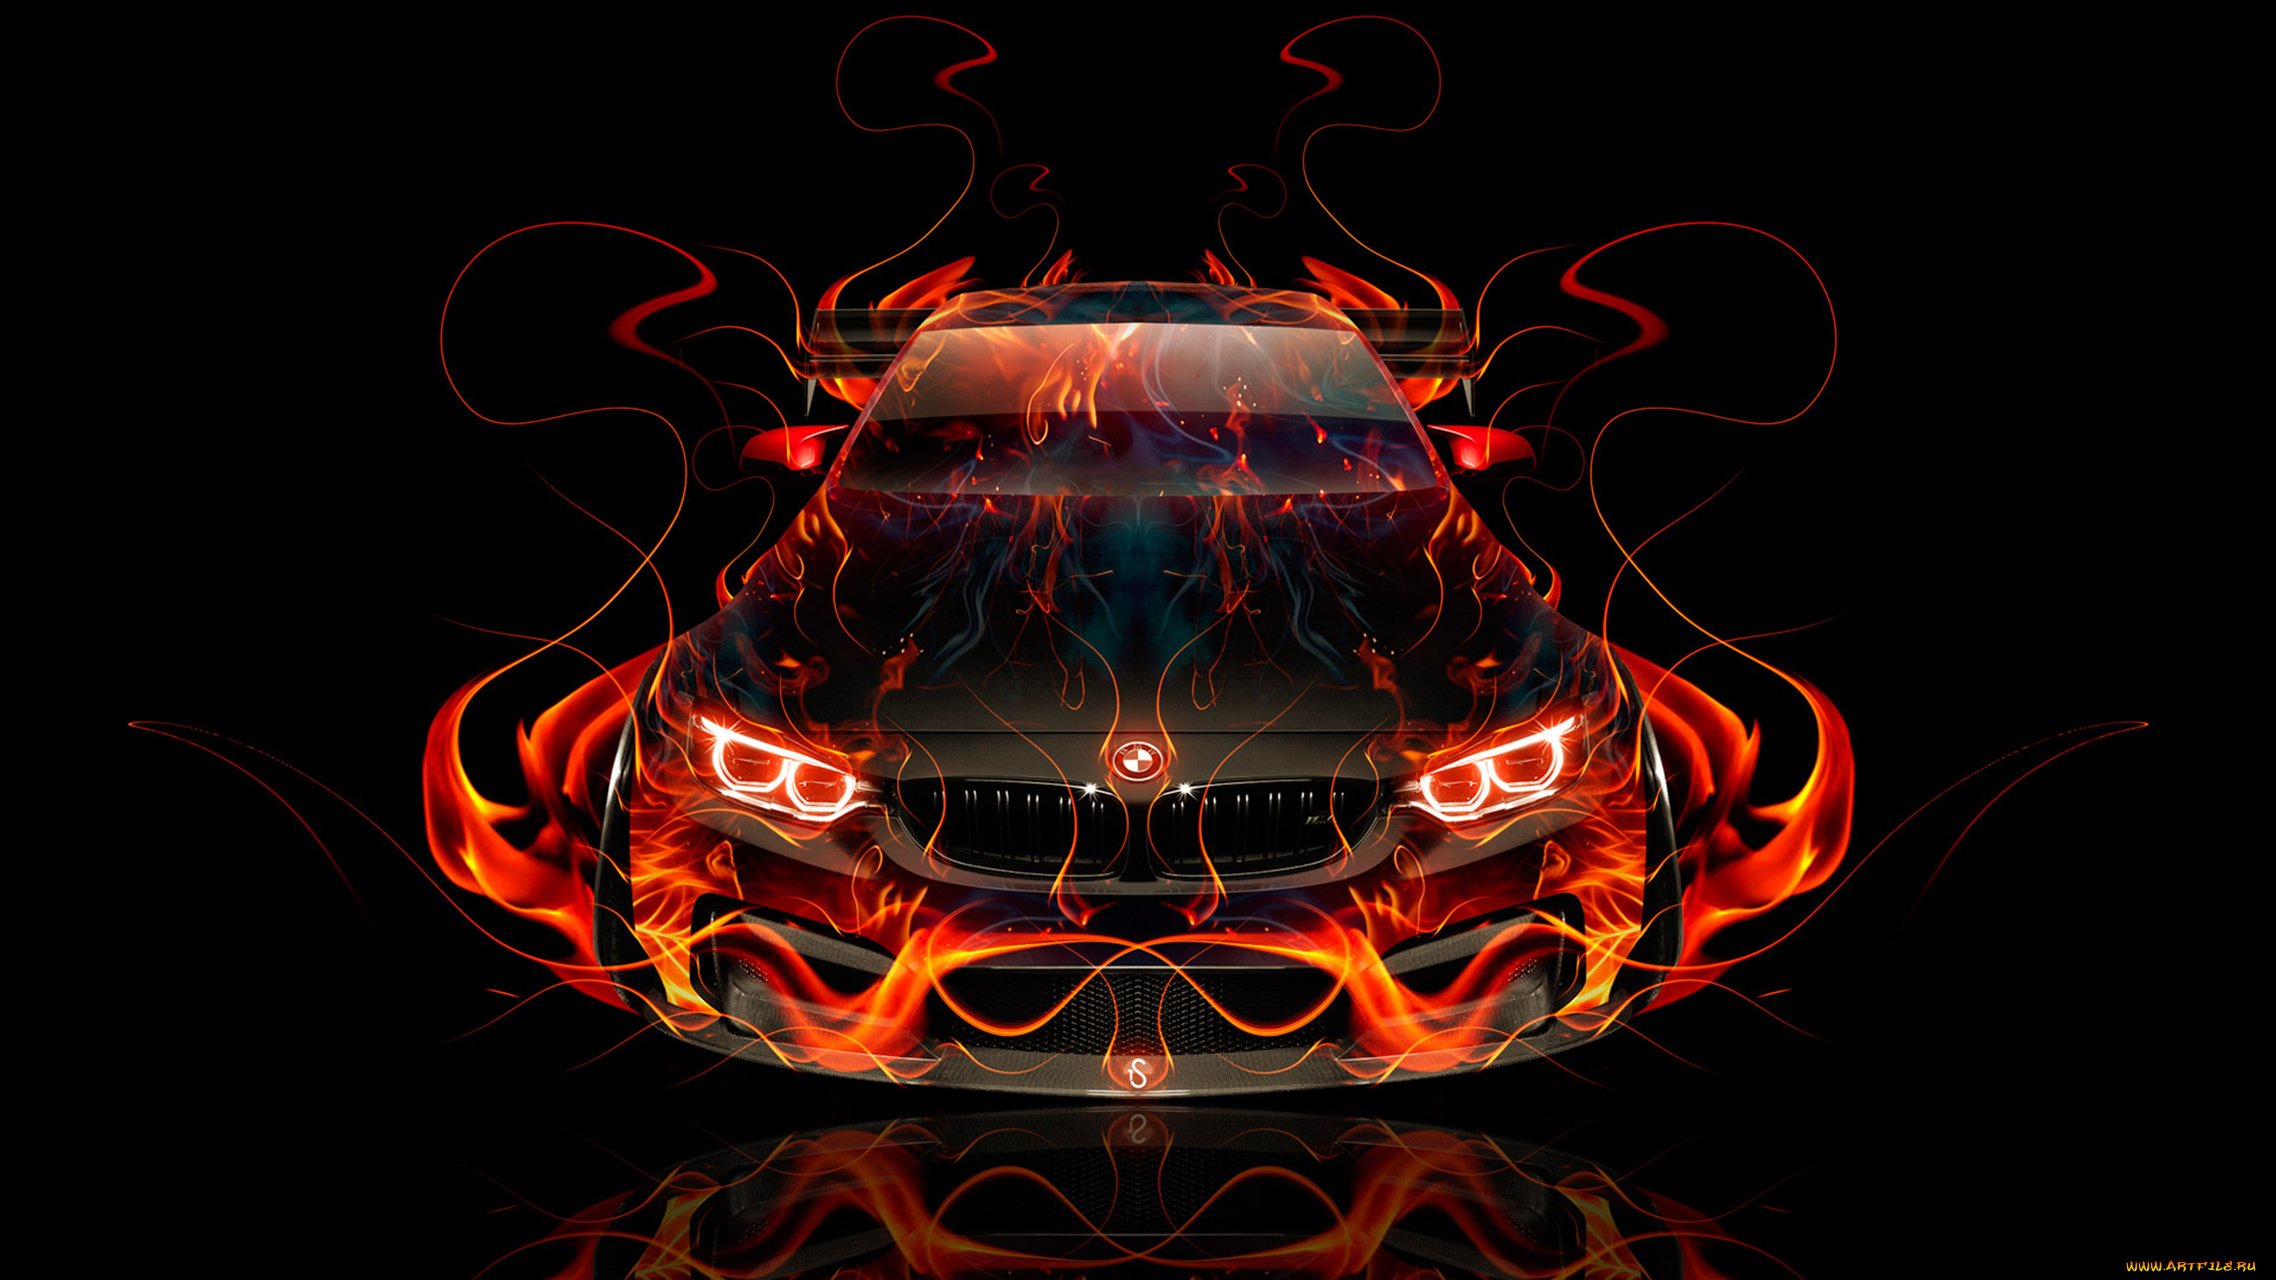 bmw, m4, tuning, frontup, super, fire, abstract, car, 2016, автомобили, 3д, bmw, m4, tuning, frontup, super, fire, abstract, car, 2016